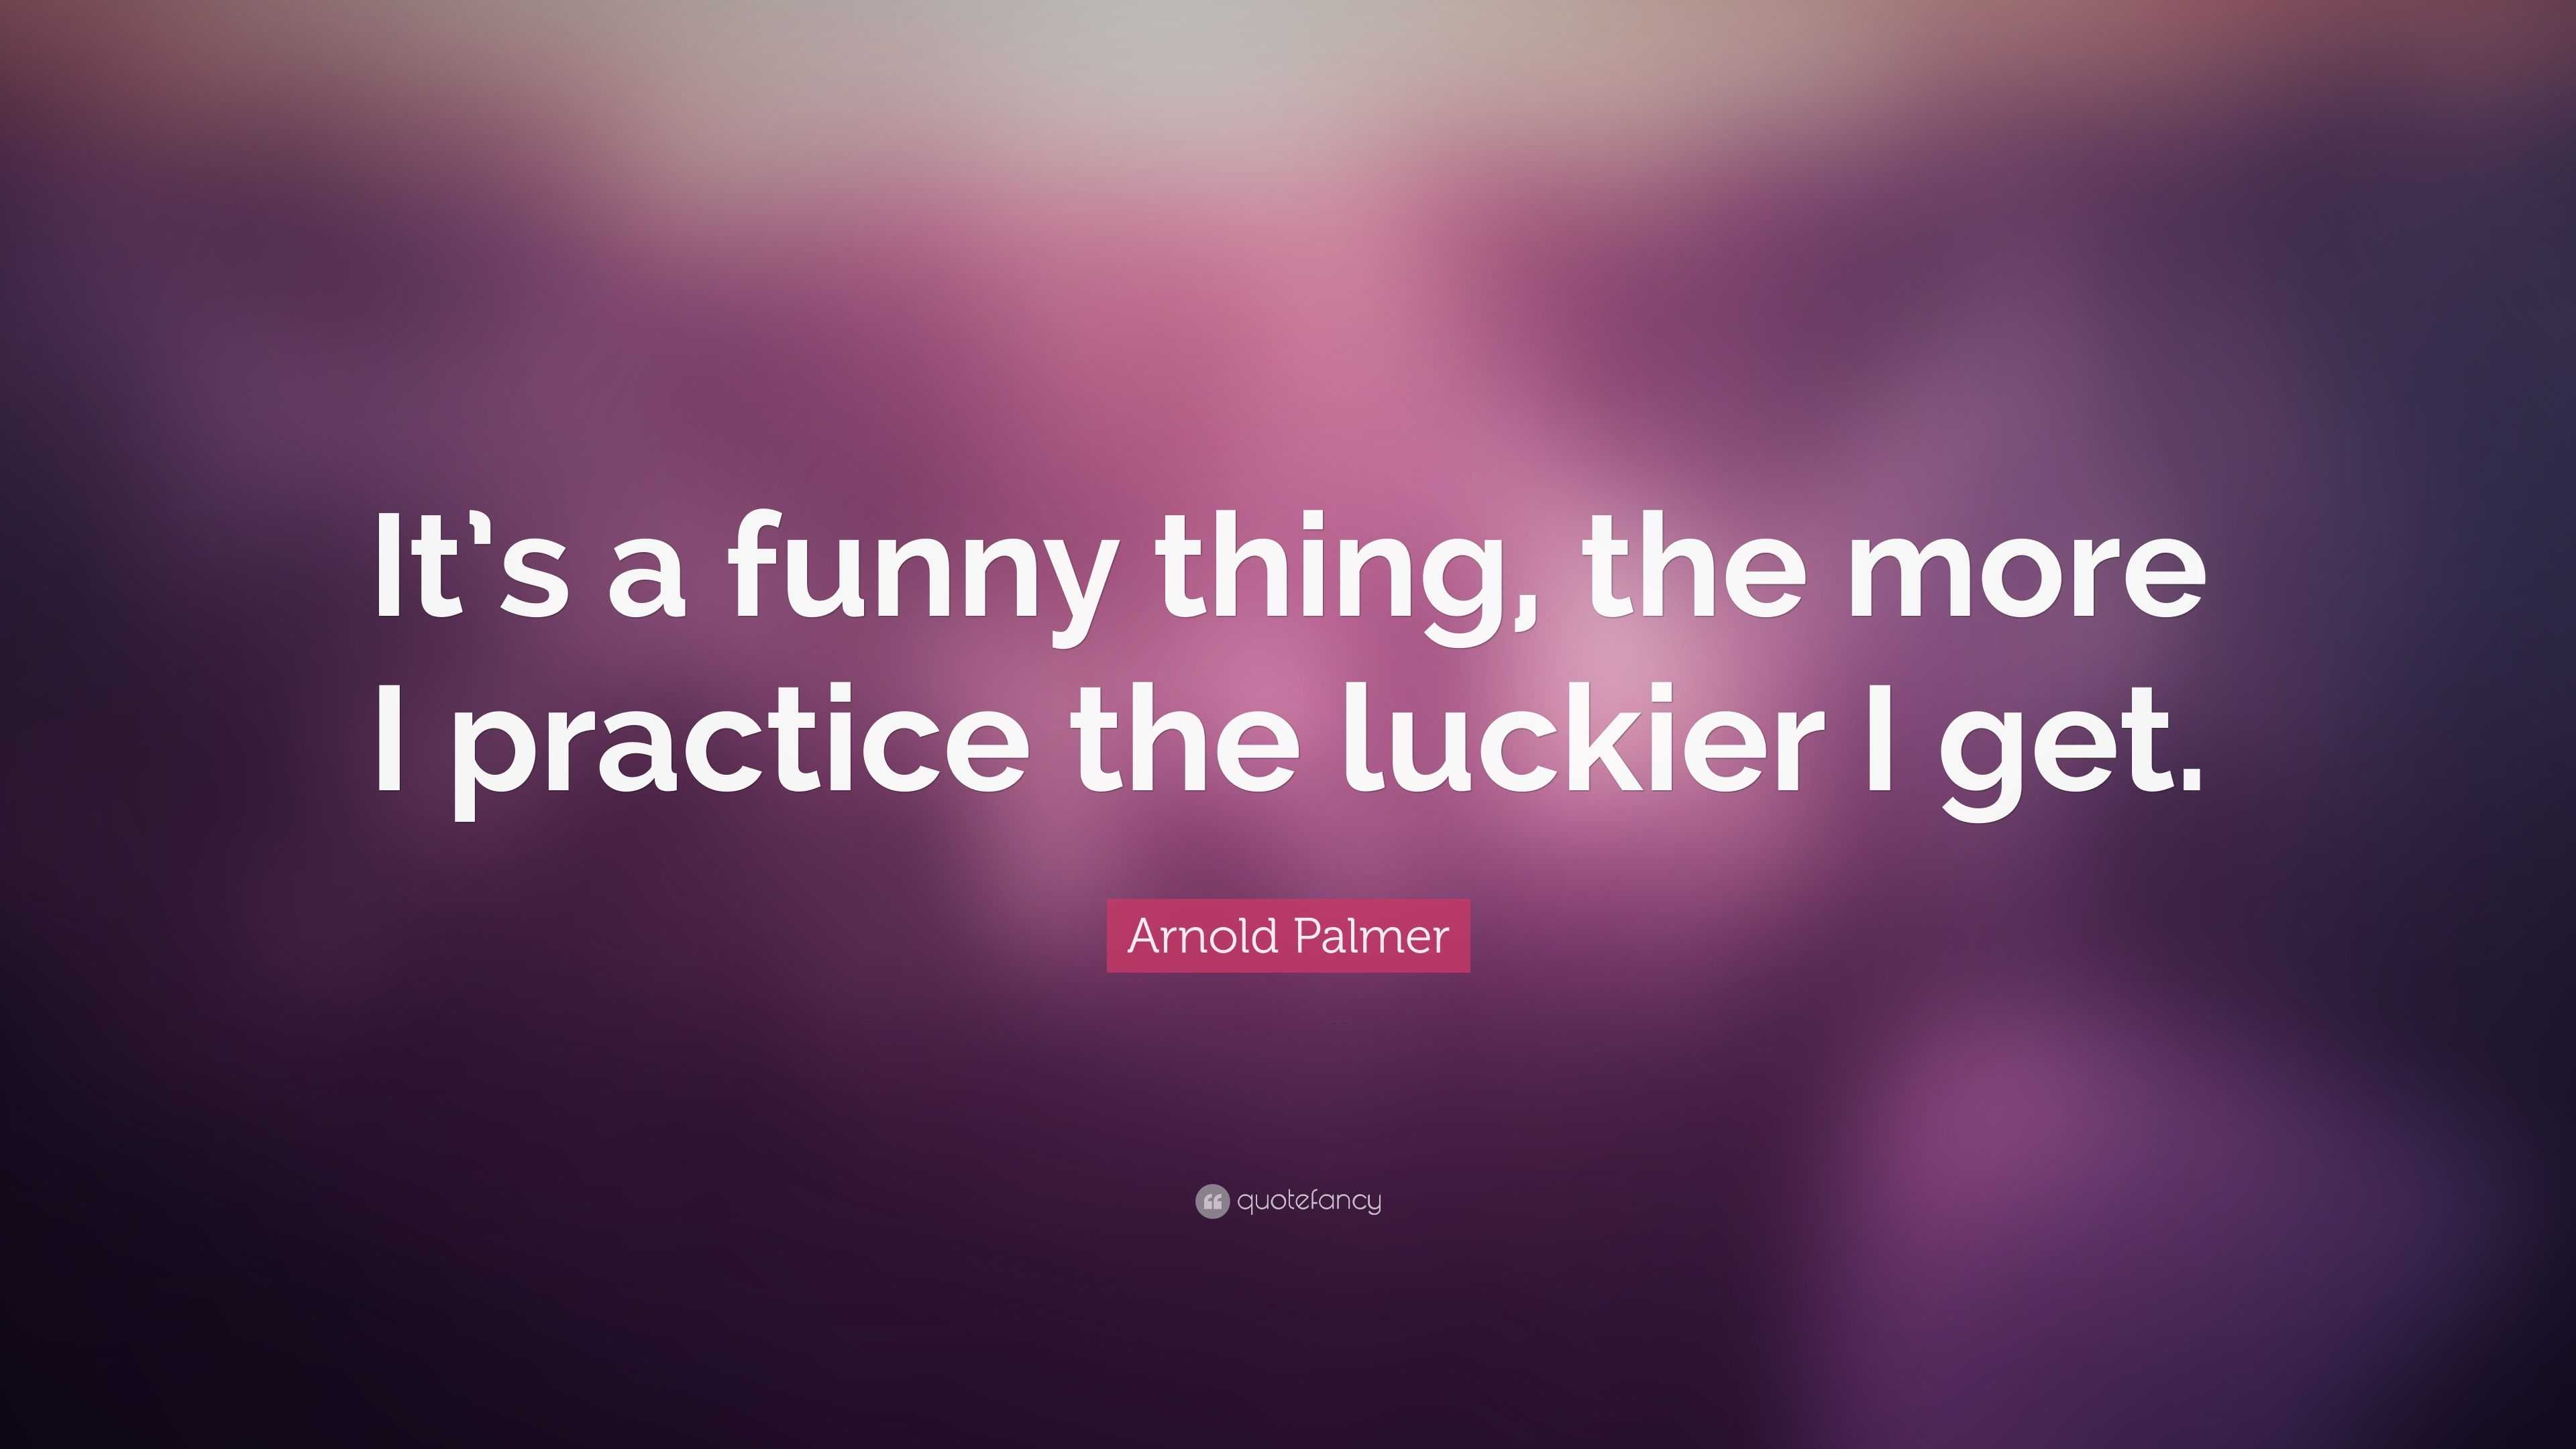 Arnold Palmer Quote: “It's a funny thing, the more I practice the luckier I  get.”